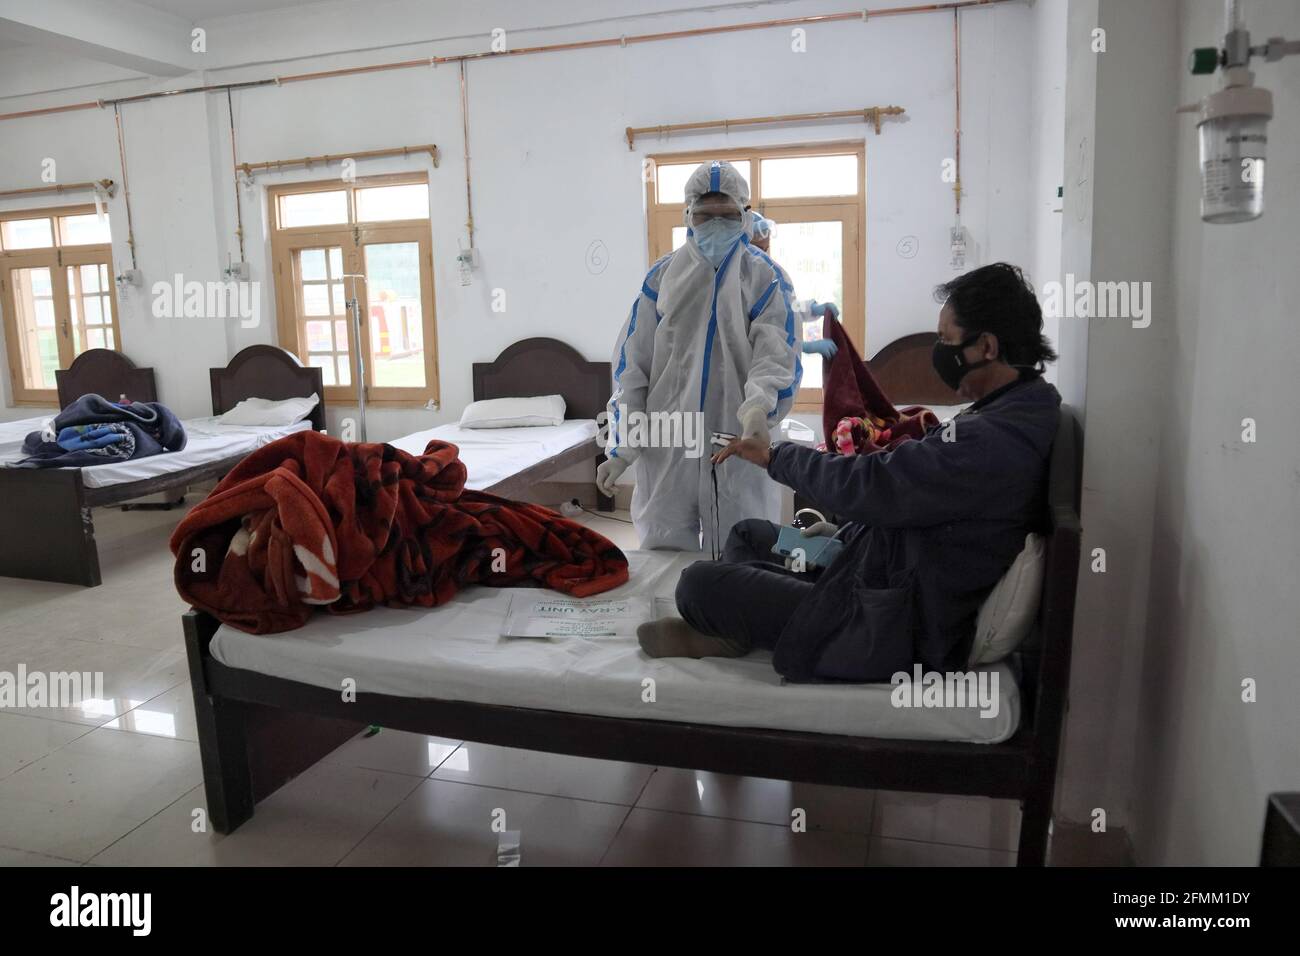 May 8, 2021: A Health worker examins a Covid-19 patient at a temporary Covid-19 hospital in Srinagar, Indian Administered Kashmir on 08 May 2021. A Local NGO Athrout has converted Hajj house into a 100-bedded Covid centre as the space in hospitals is filling up fast Credit: Muzamil Mattoo/IMAGESLIVE/ZUMA Wire/Alamy Live News Stock Photo